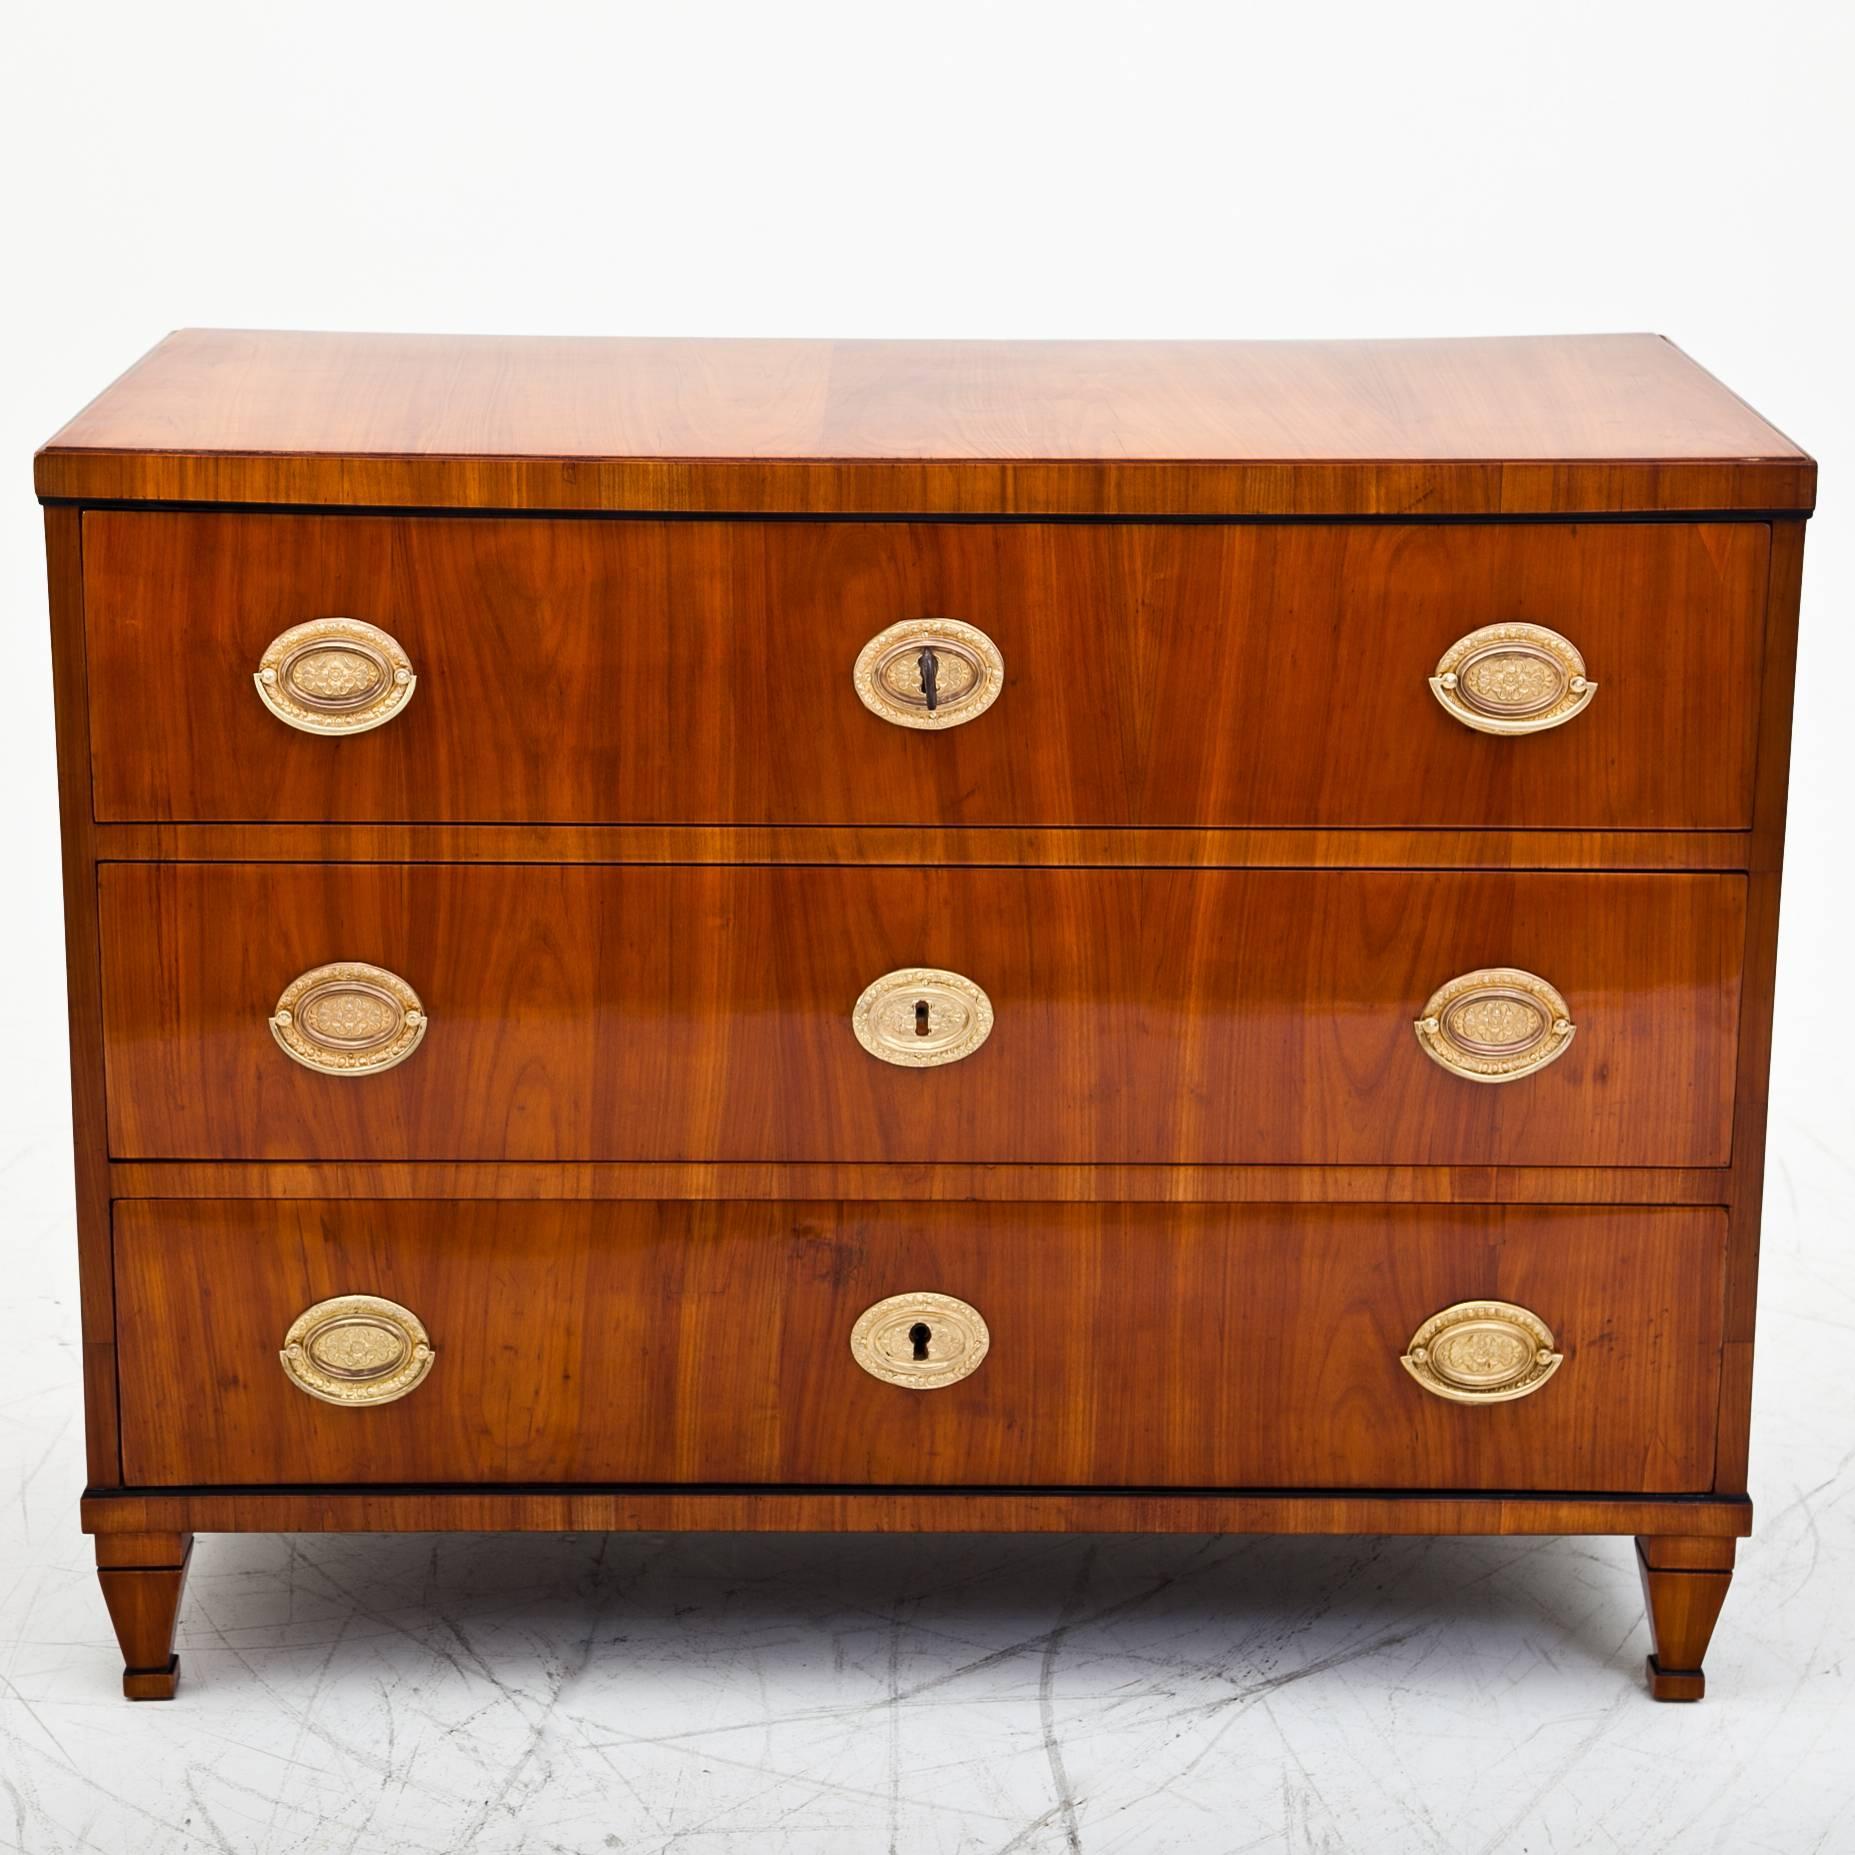 Early 19th Century Biedermeier Chest of Drawers, circa 1830